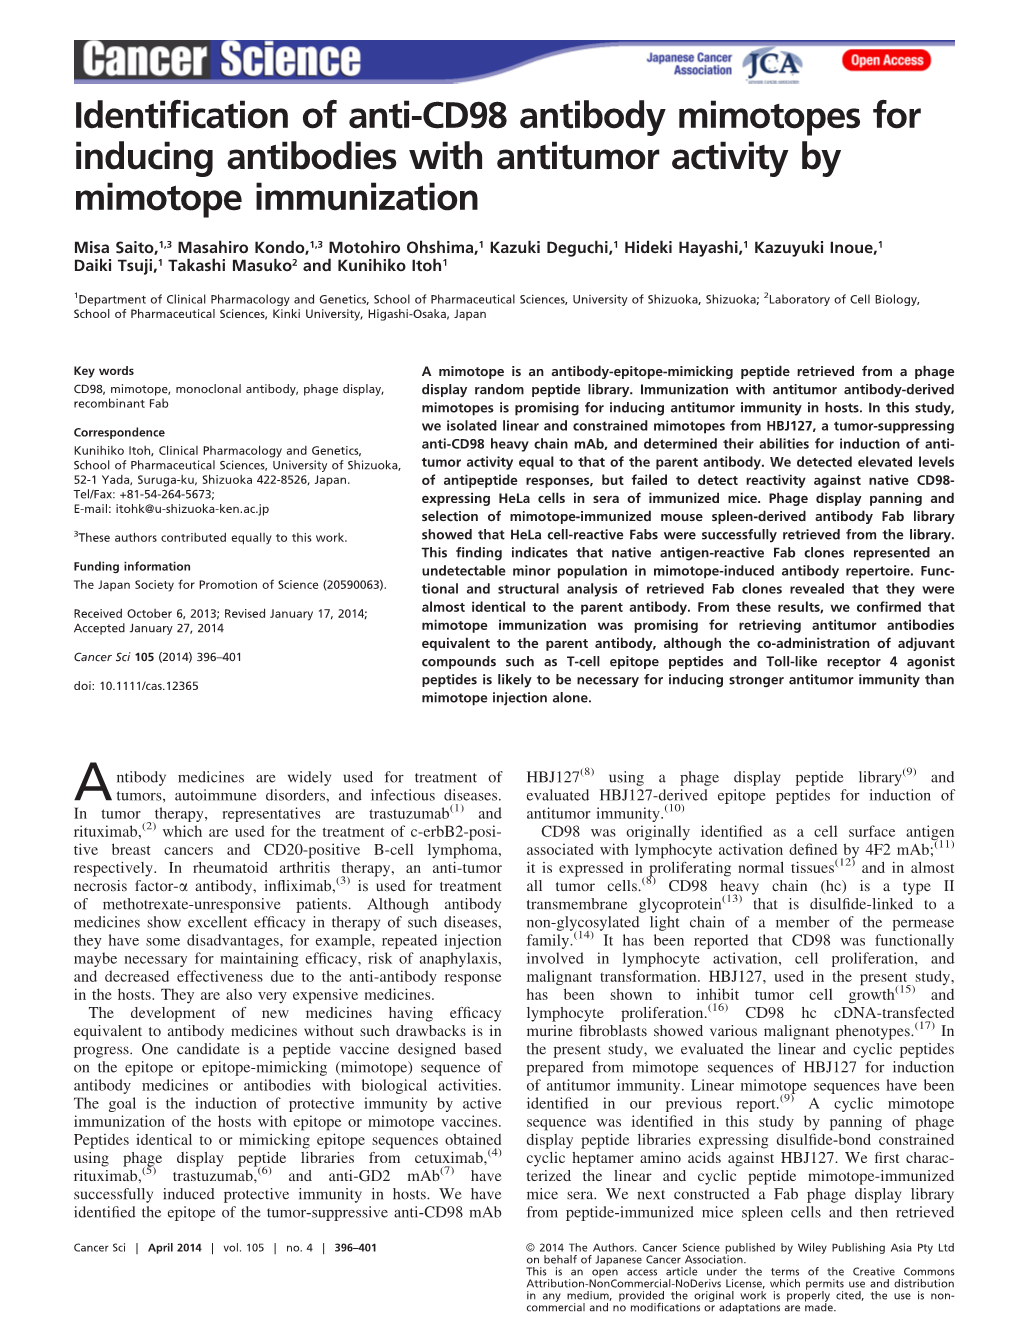 Identification of Anti-CD98 Antibody Mimotopes for Inducing Antibodies with Antitumor Activity by Mimotope Immunization